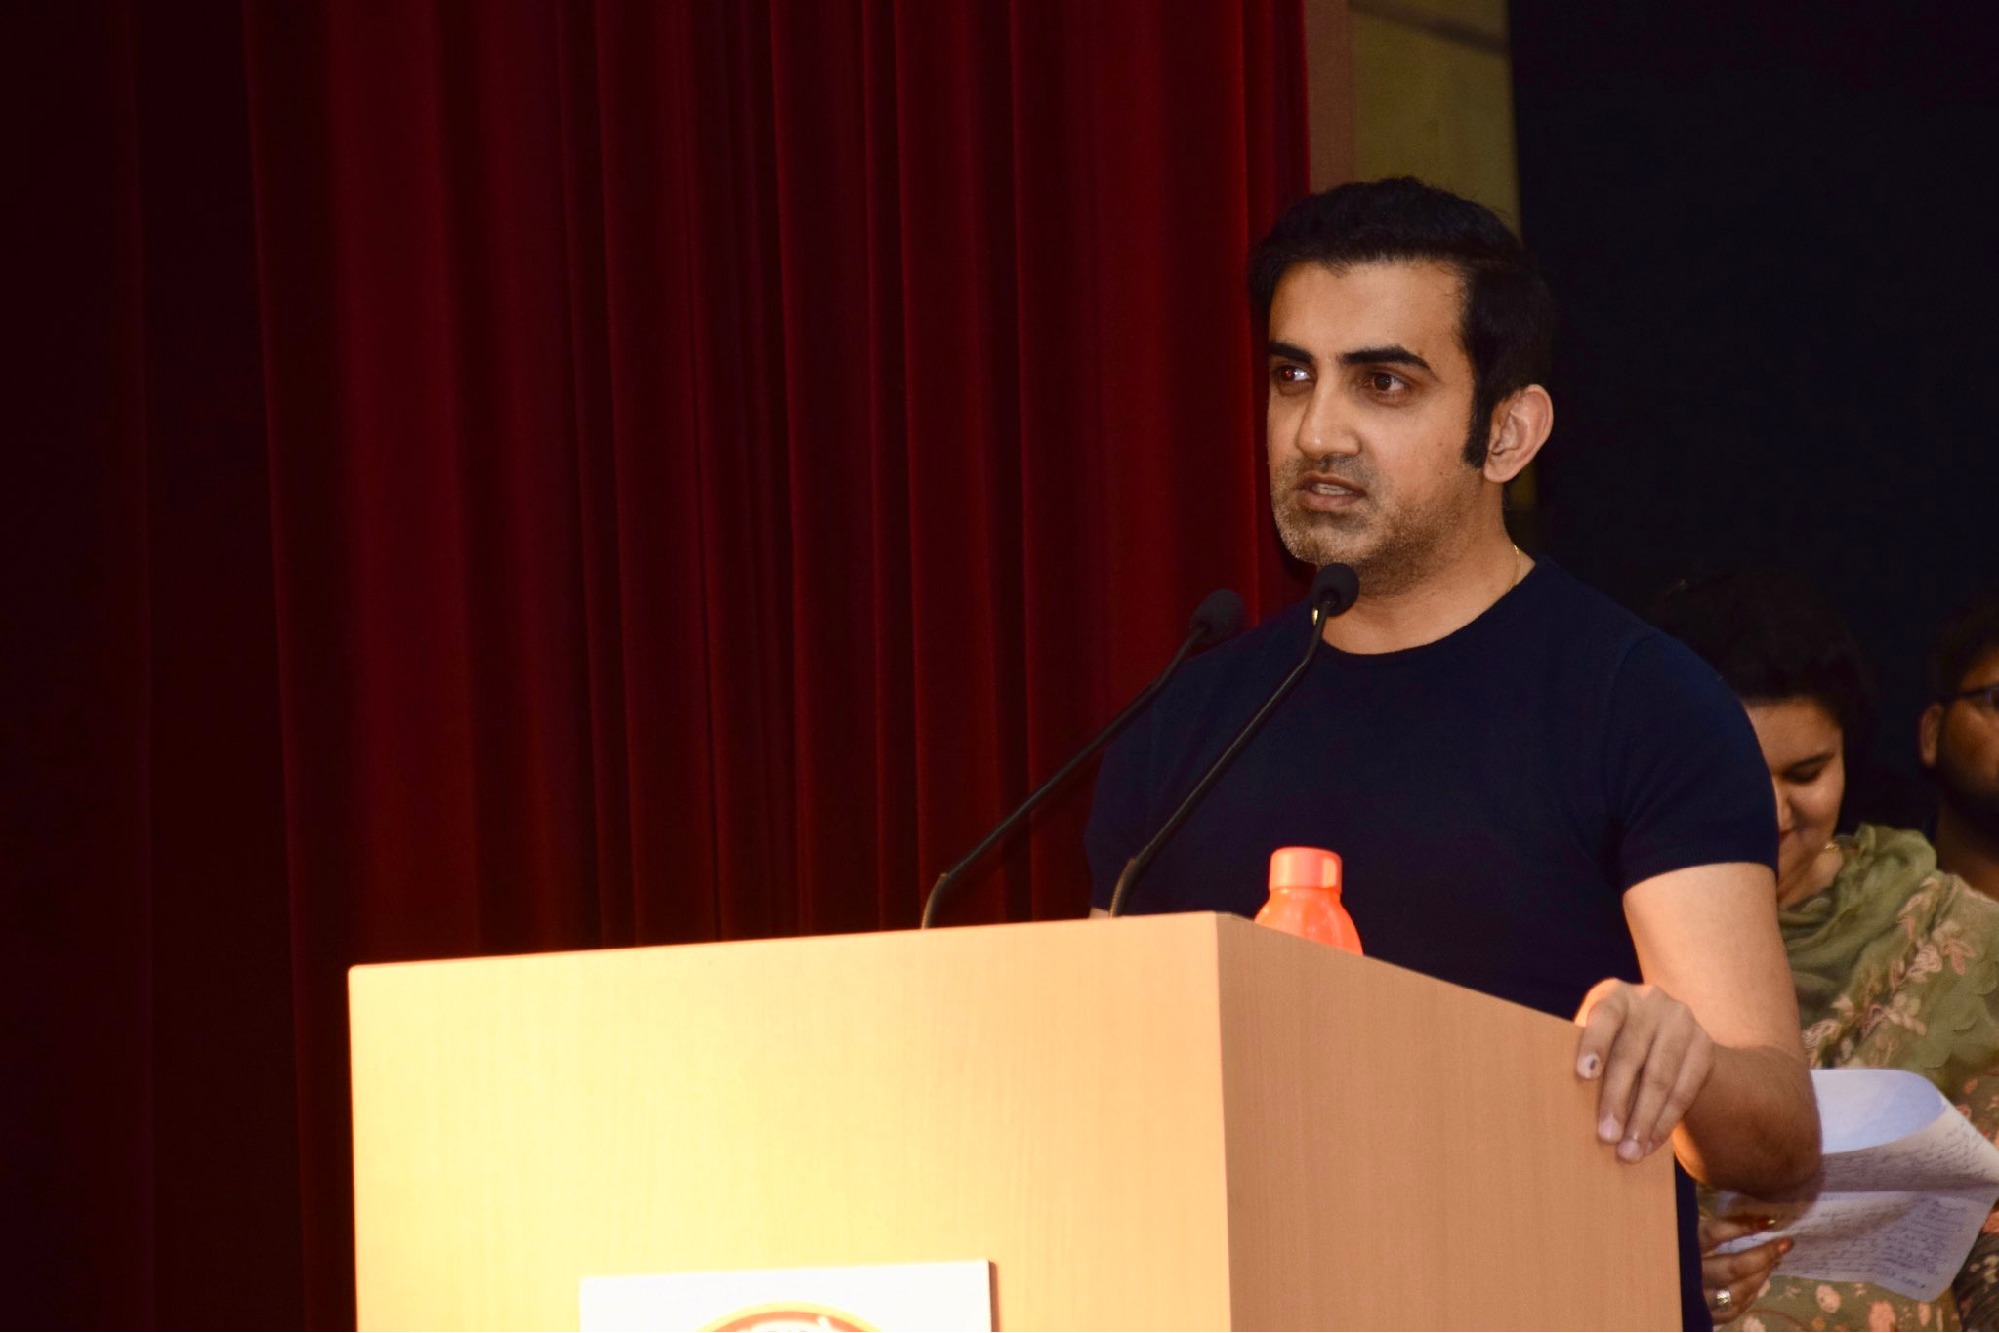 There are many viruses destroying our country from within says gambhir